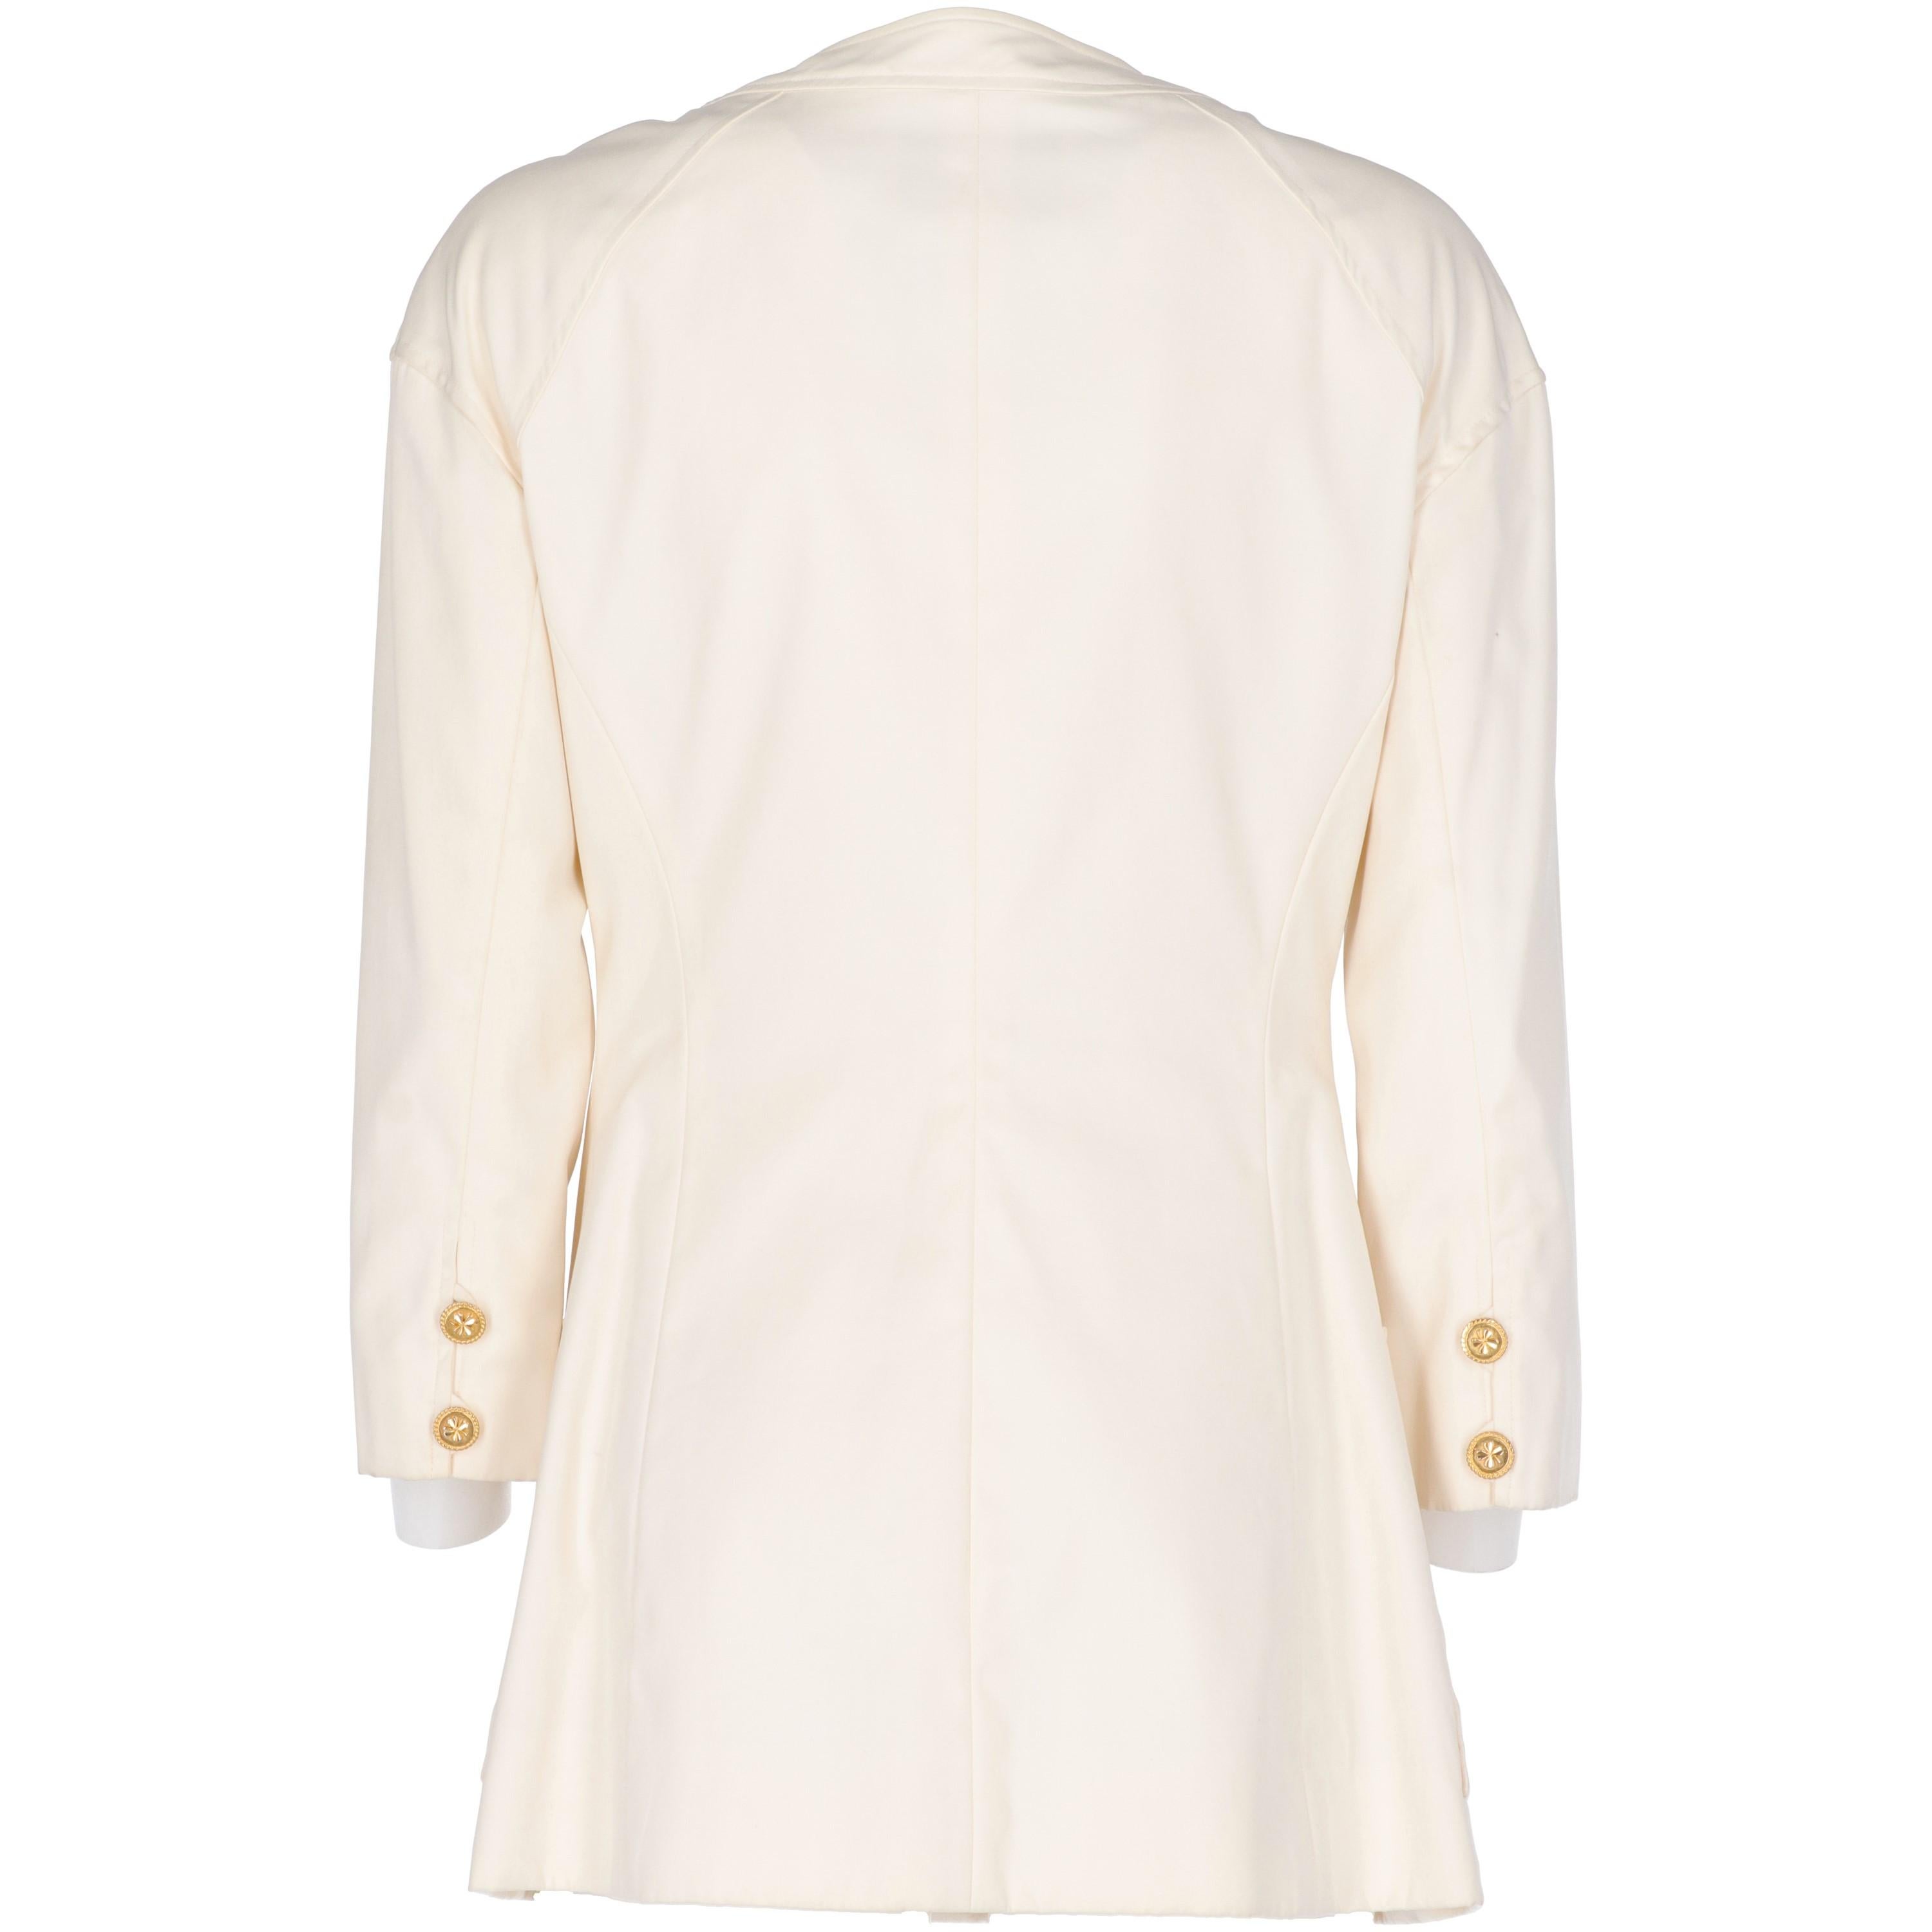 White 1980s Chanel Ivory Cotton Double Breasted Jacket